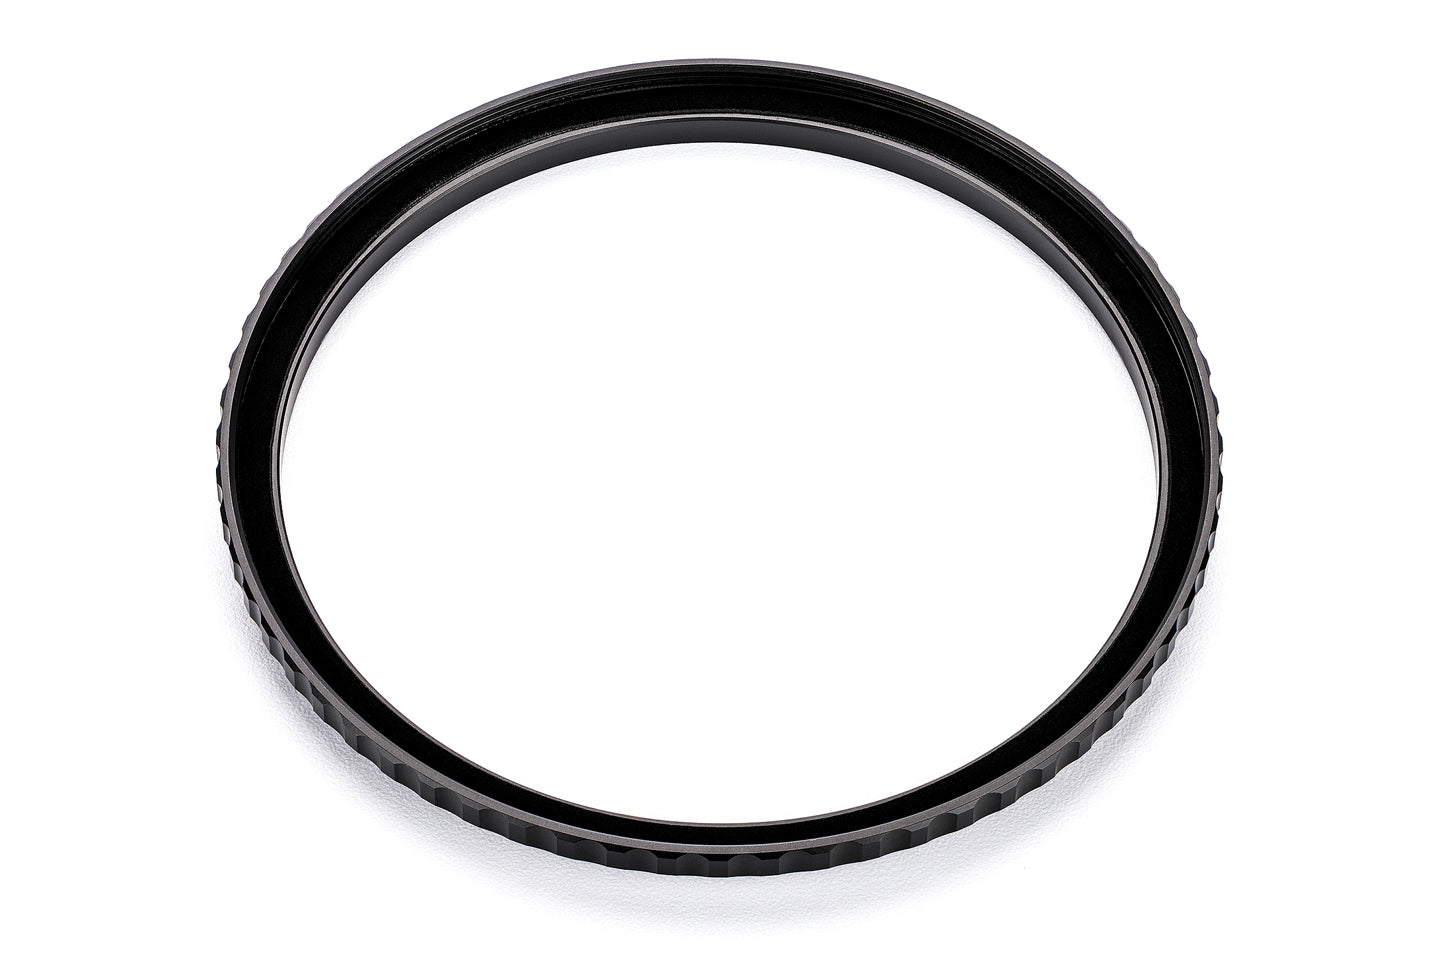 NiSi Brass Step Rings for Circular Filters